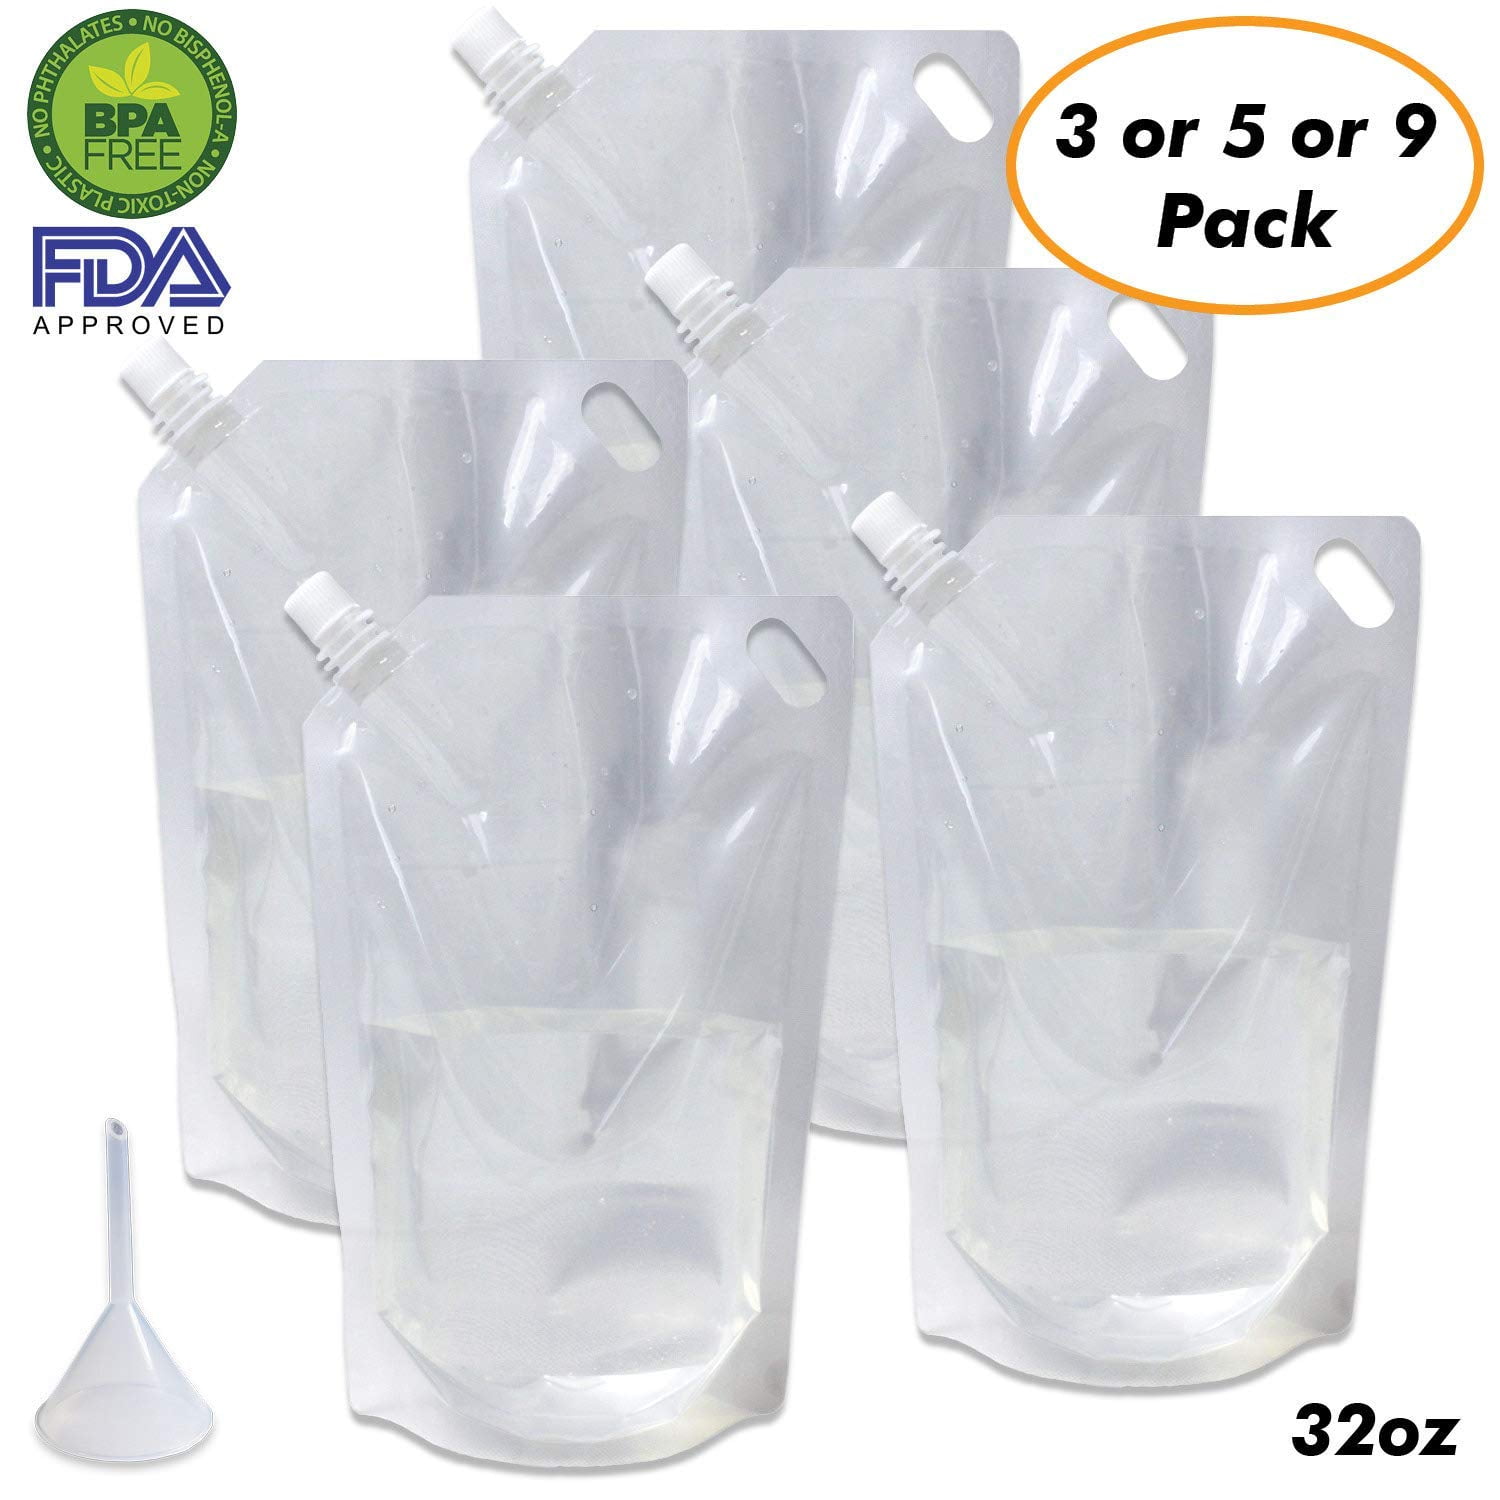 Refillable Liquid Pouches Flask Liquor Transparent Bag Beer Packaging Bag Reusable Clear Drinking Bags with Rotating Nozzle Cruise Pouch for Travel